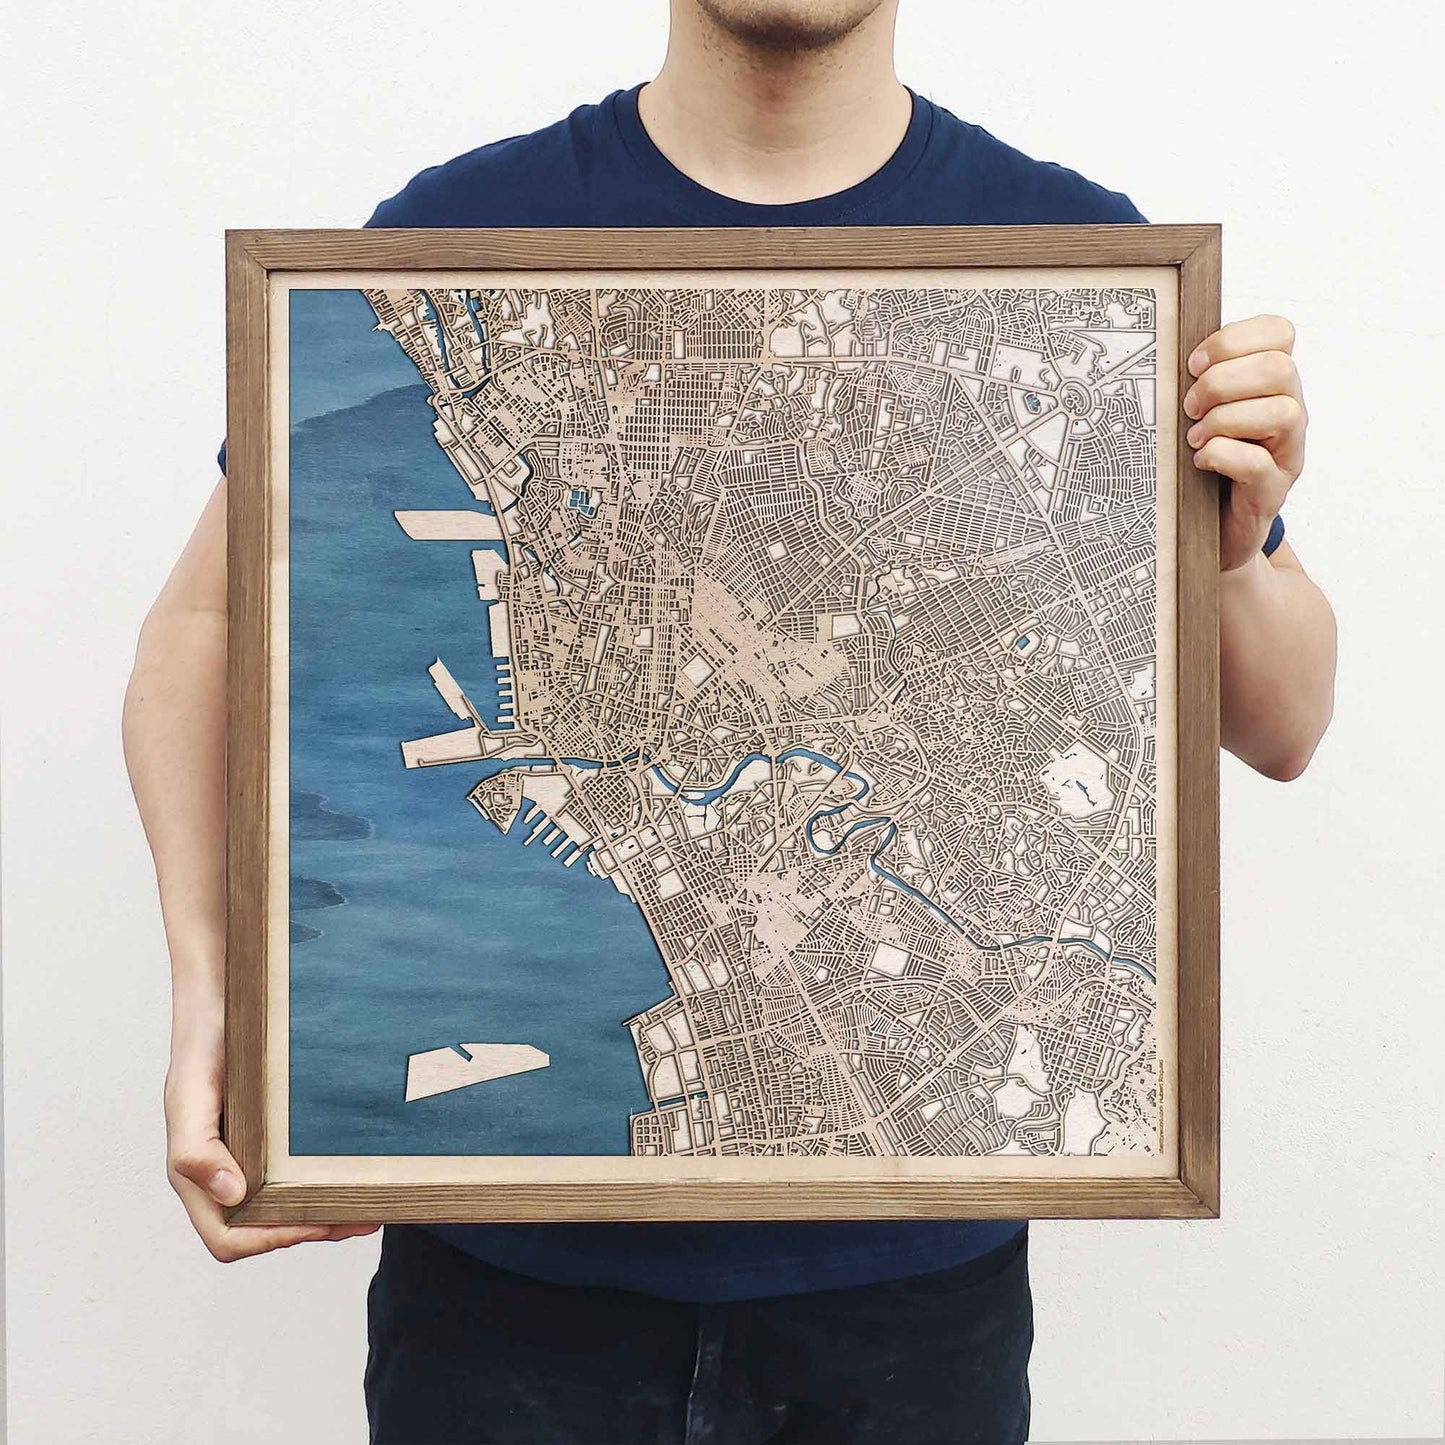 Manila Wooden Map by CityWood - Custom Wood Map Art - Unique Laser Cut Engraved - Anniversary Gift